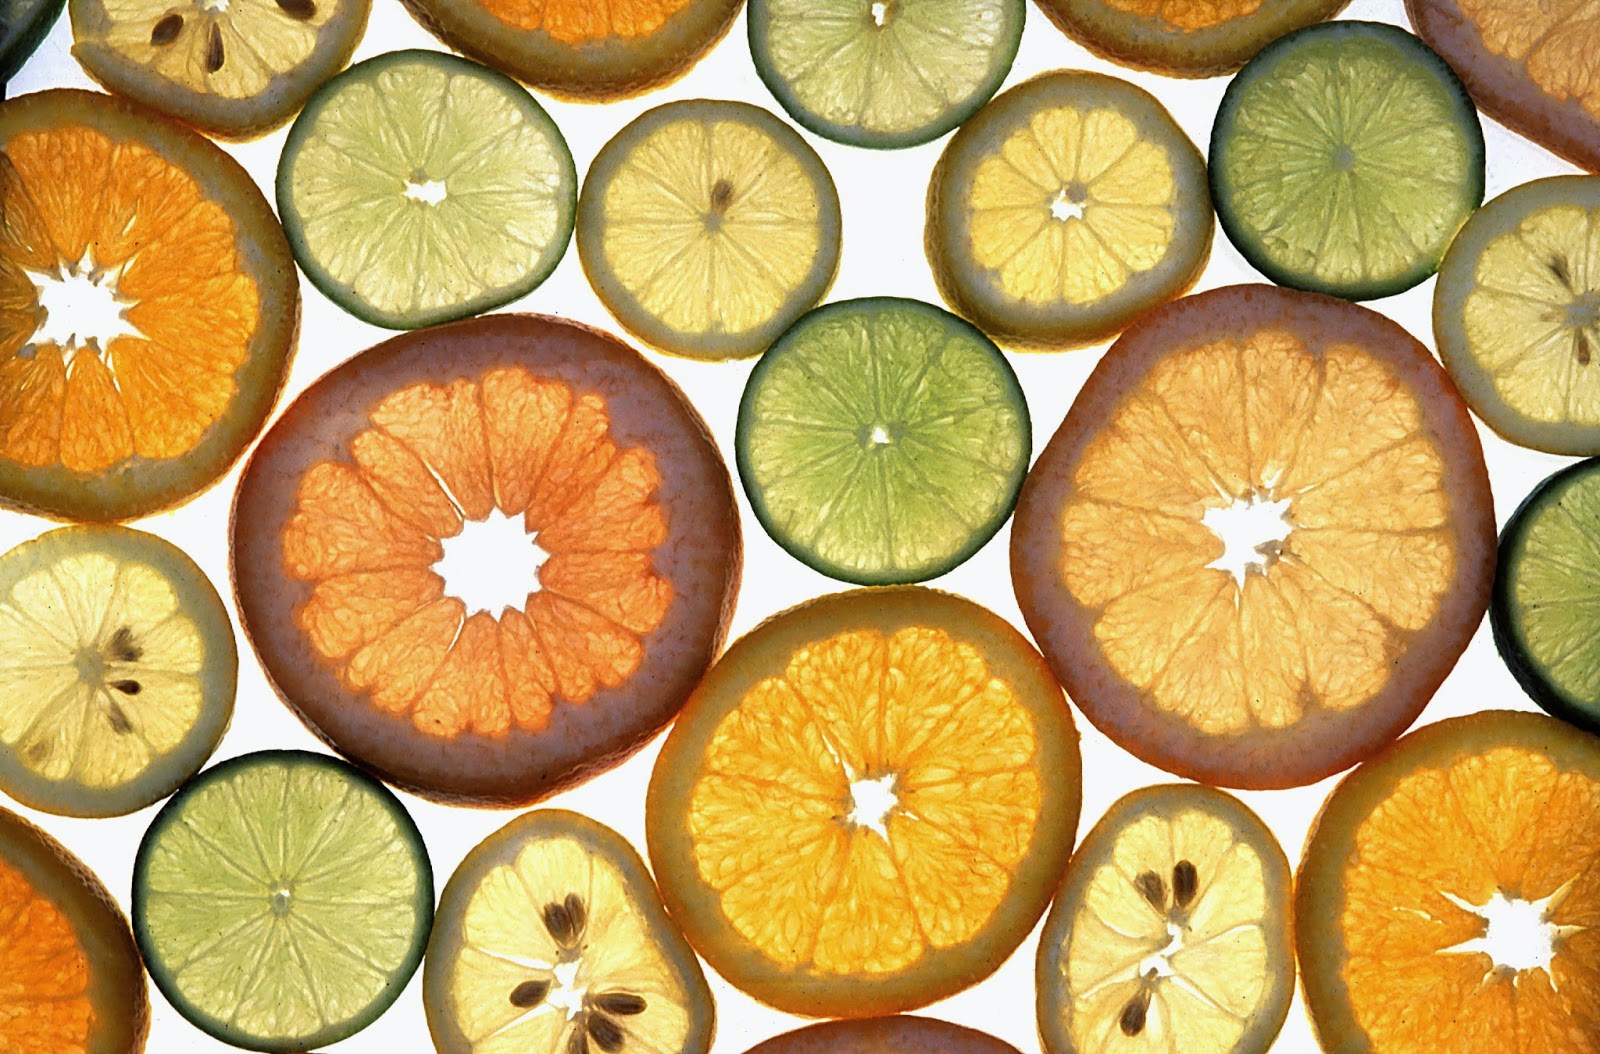 Botanical Accuracy: The species names of citrus - a sweet, sour, and